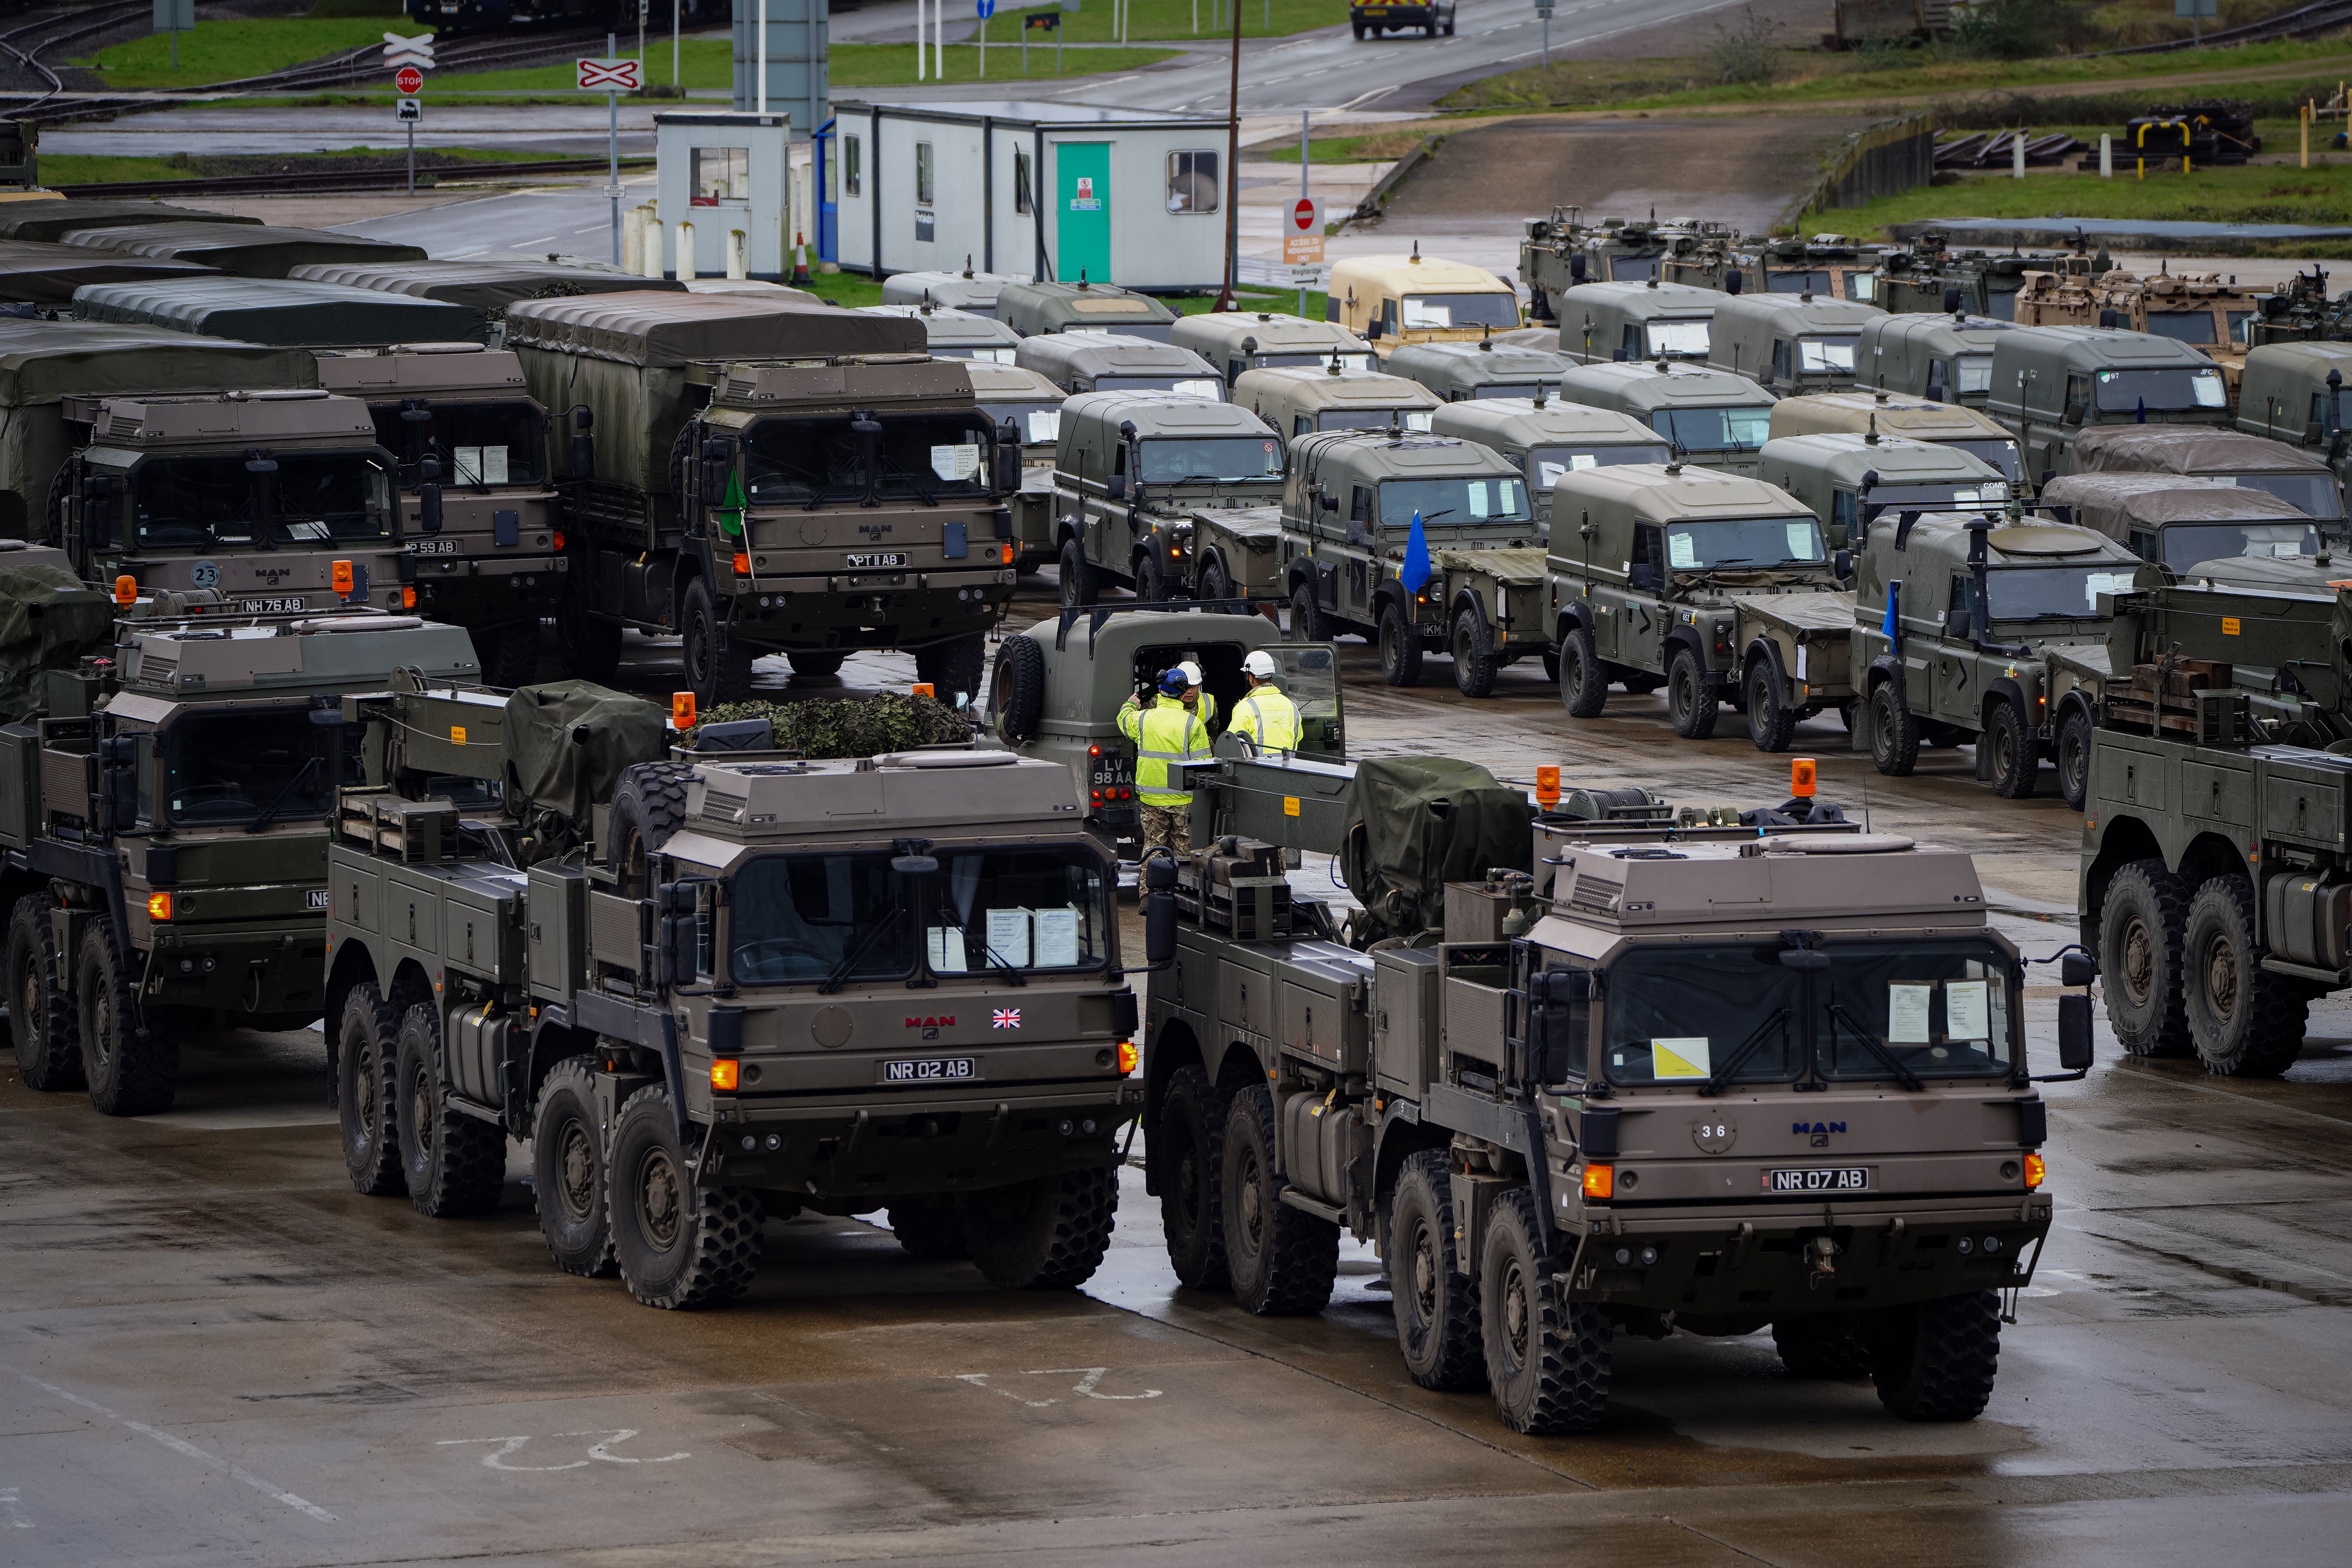 British Army troops and vehicles depart for largest Nato exercise in 40 years